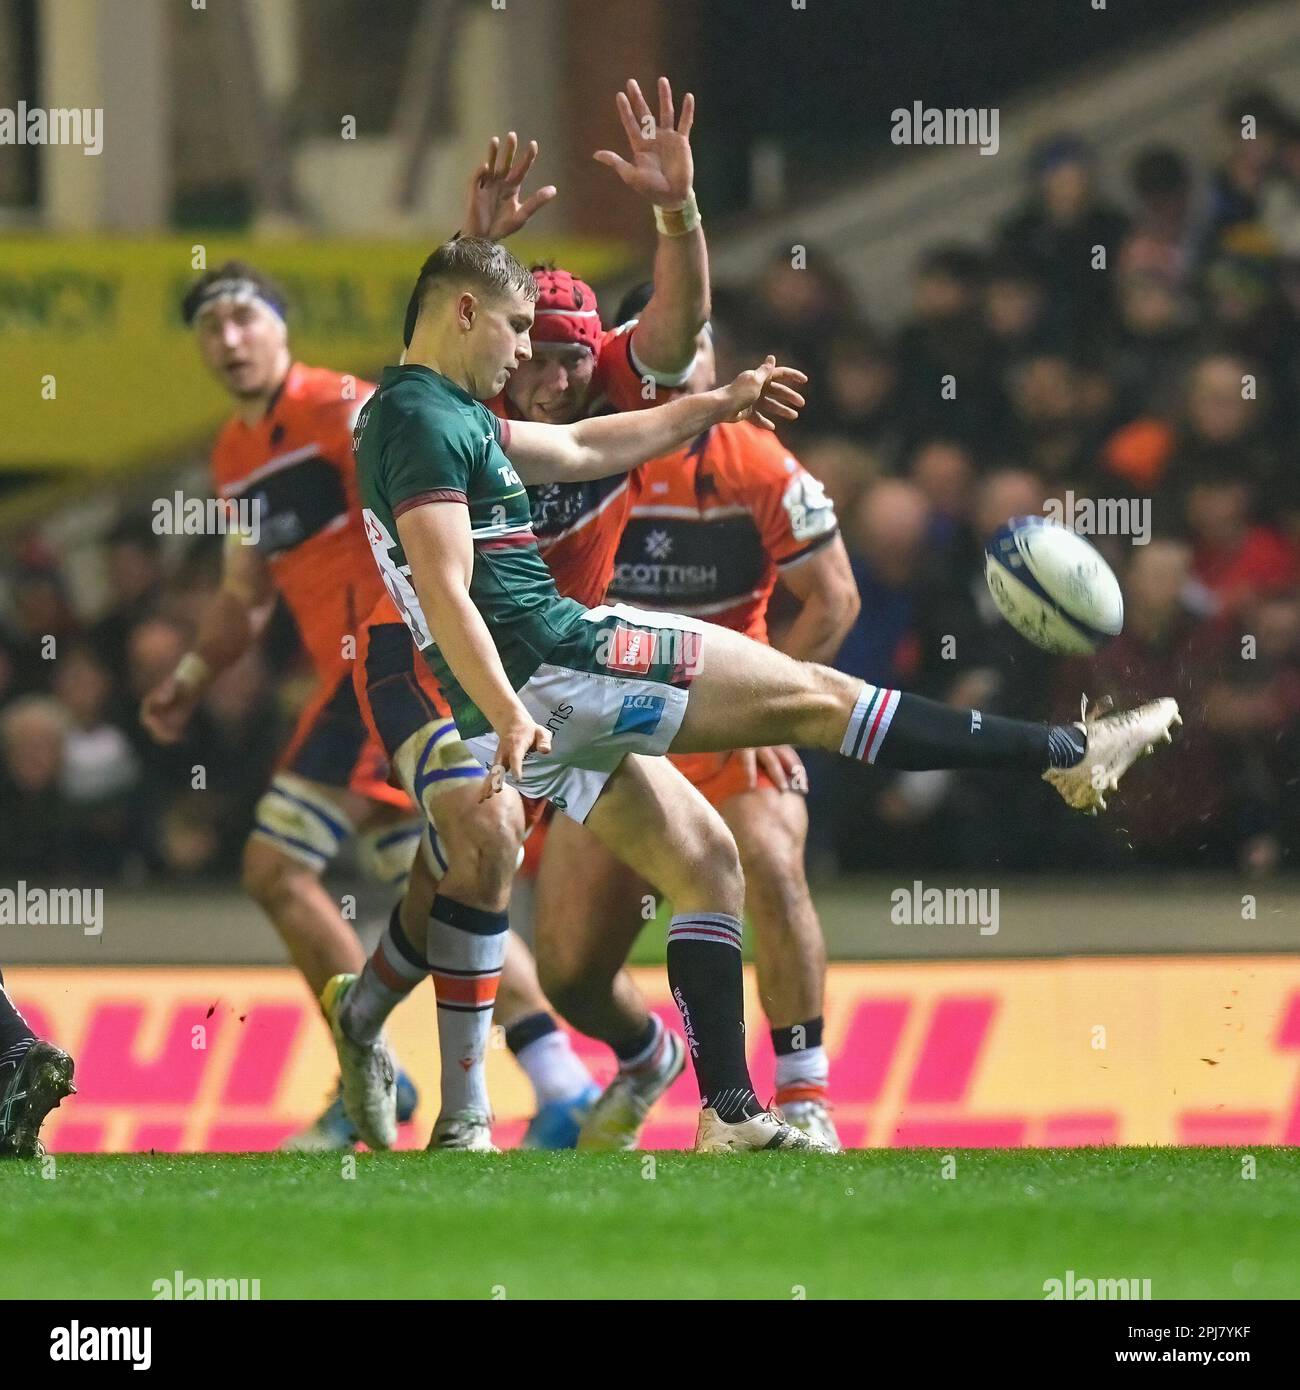 Leicester Tigers Rugby v Edinburgh Rugby Team at the Mattioli Stadium in Leicester, UK on 31 March 2023.  Jack Van Poortvliet (Leicester Tigers) kicks the ball avoiding block from Edinburgh player at the Mattioli Rugby Stadium, Leicester, Uk  Credit: Mark Dunn/Alamy Live News Stock Photo